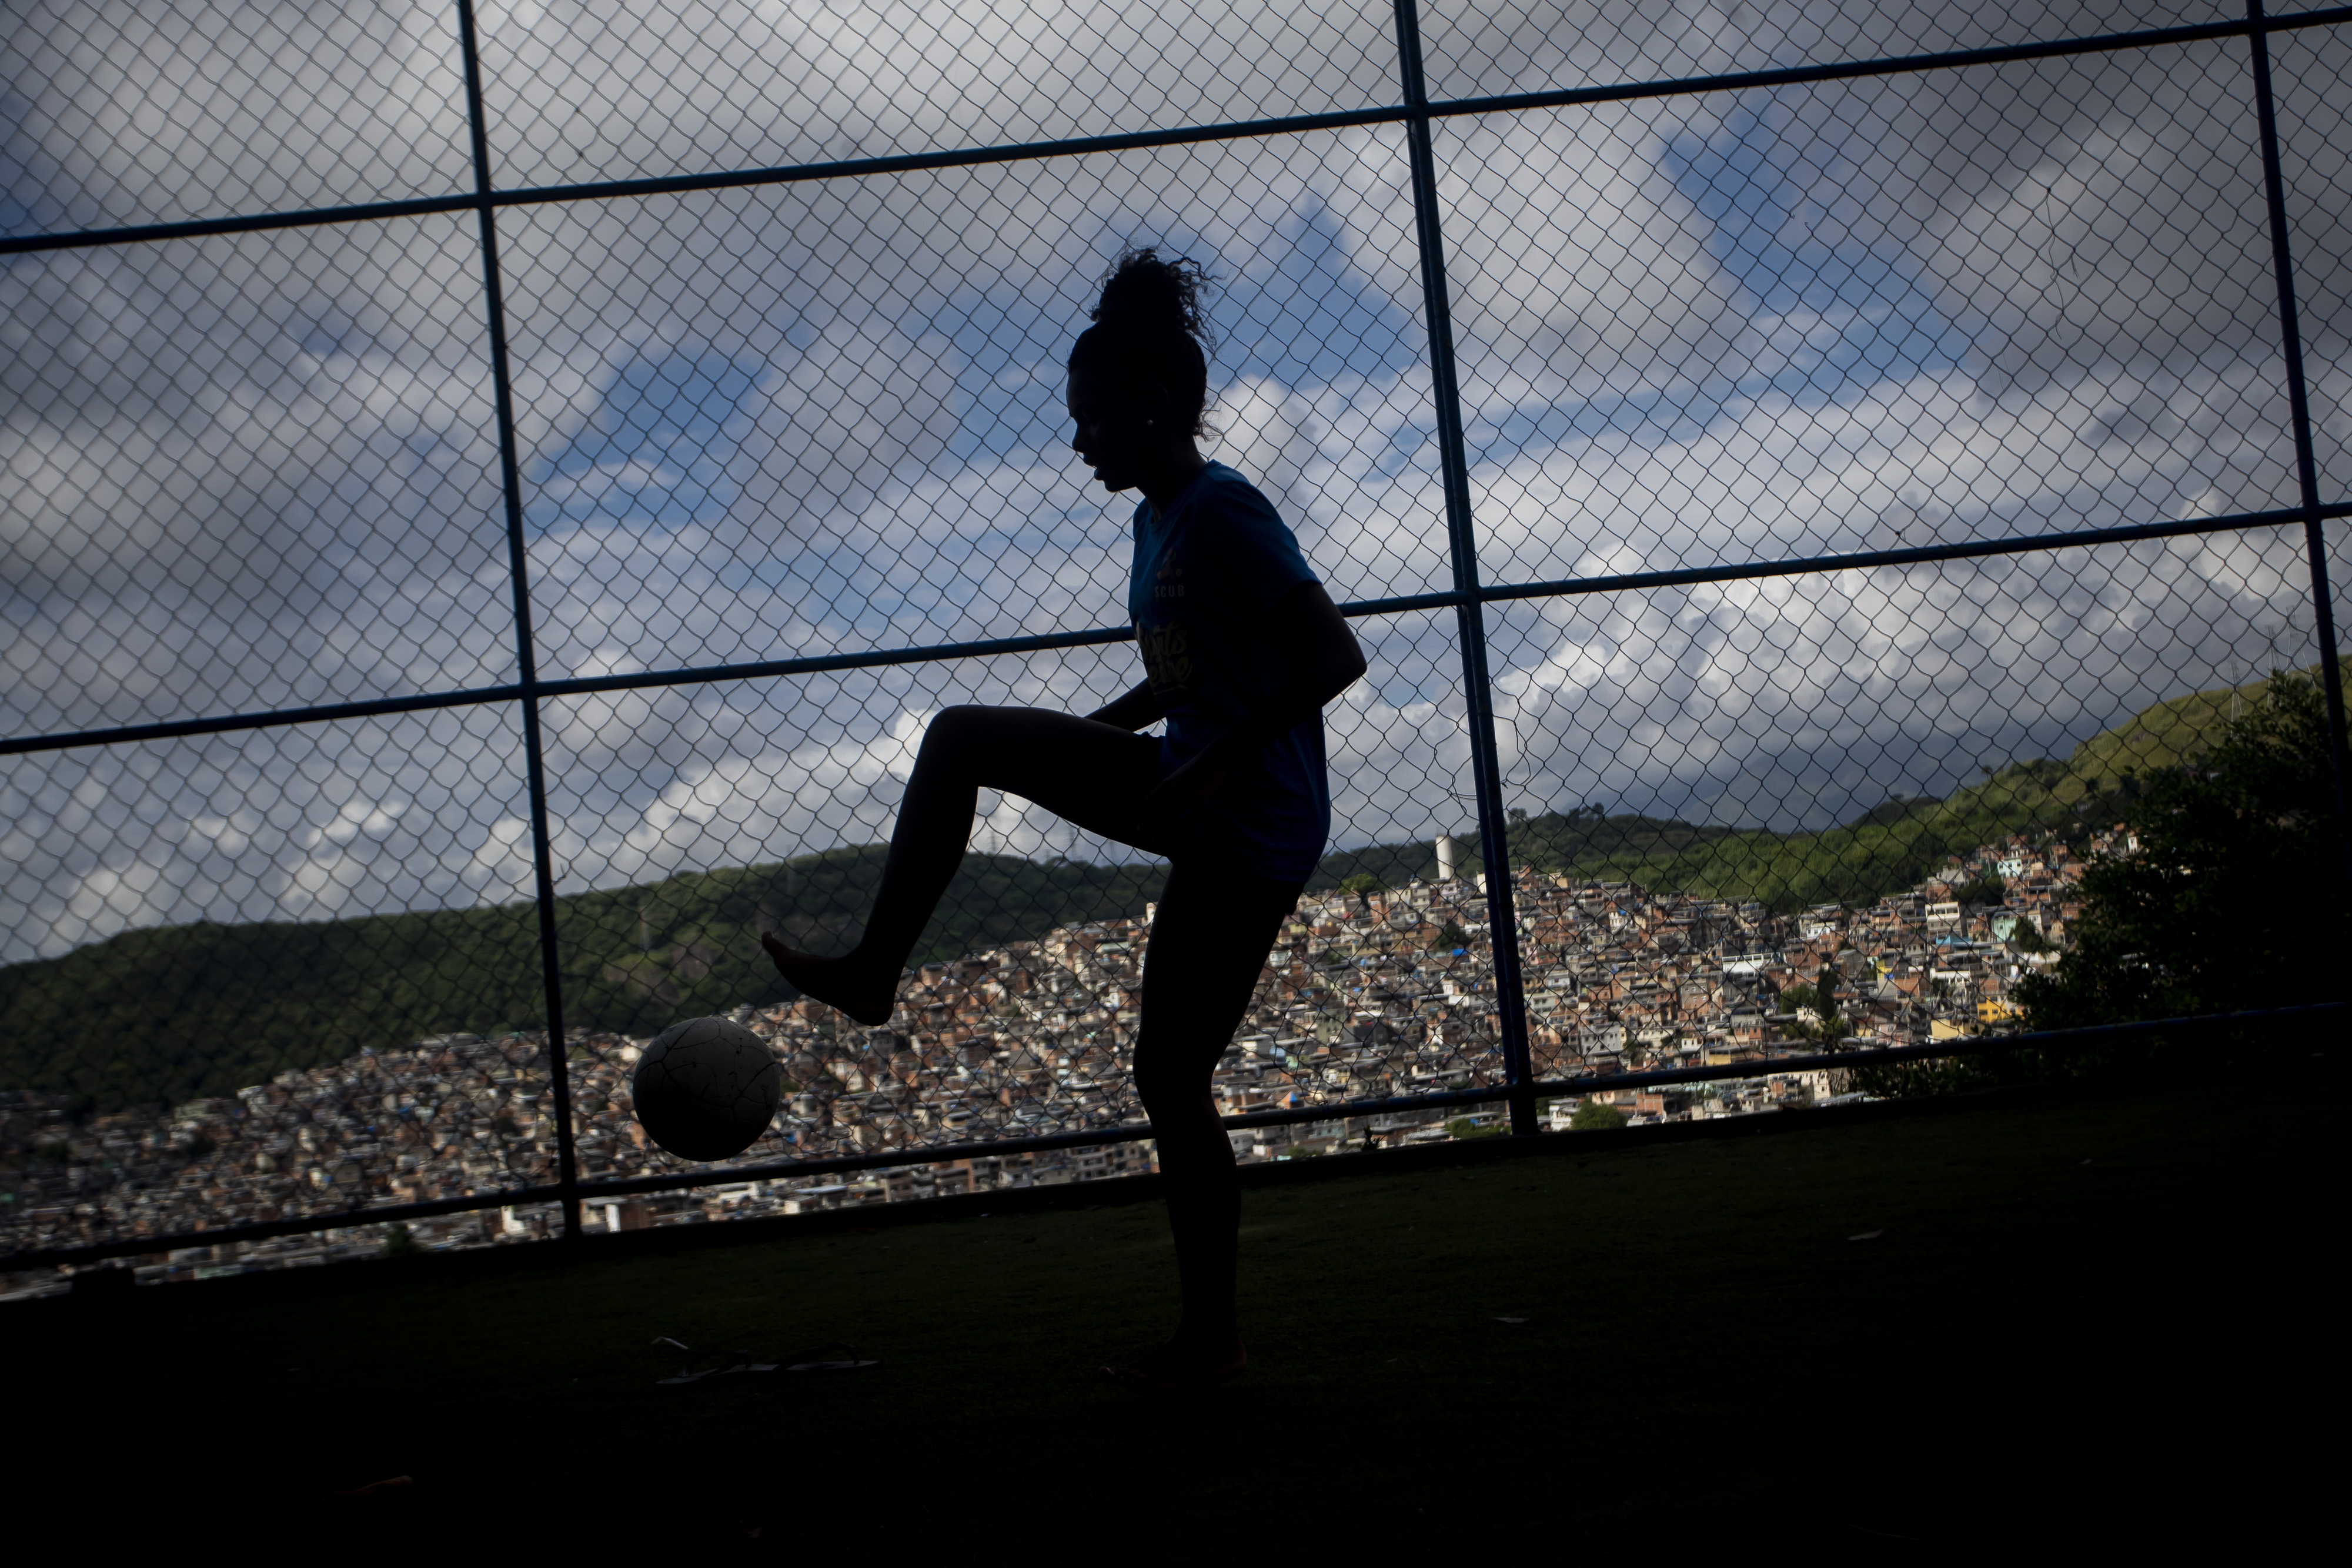 Jessica do Vale controls the ball during a street soccer training program of the NGO Street Child United Brazil, in the Complexo da Penha favela, in Rio de Janeiro, Brazil, on April 29, 2023. Girls defy the stereotype of a sport dominated by men with the support of coaches from their own community.  (AP Photo/Bruna Prado)